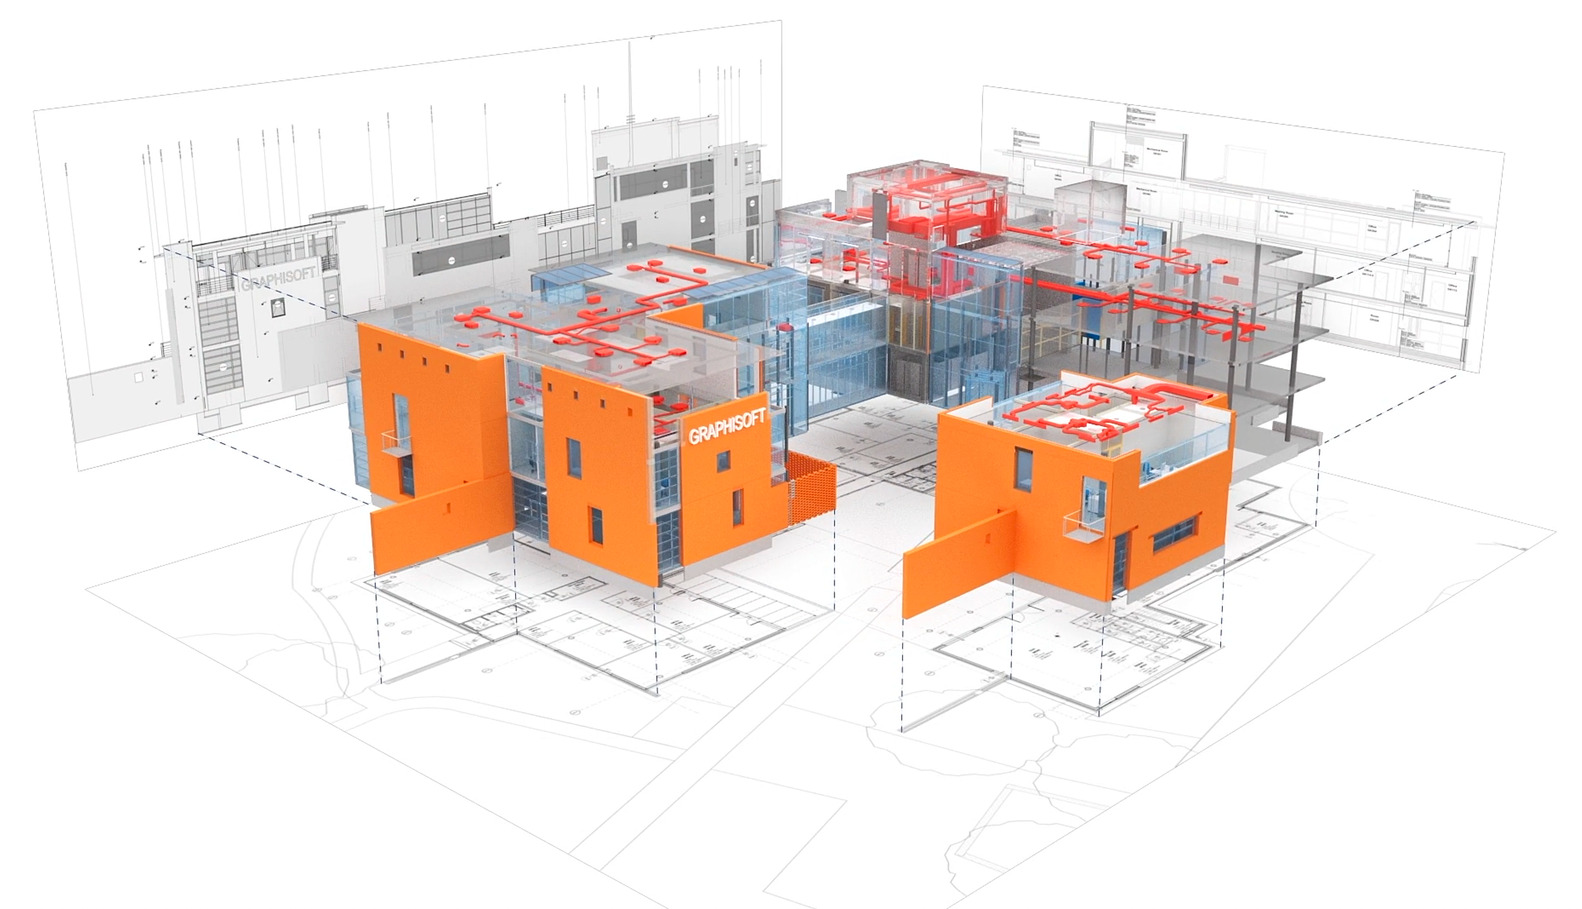 a 3D Archicad model with its corresponding 2D drawings for plans and elevations